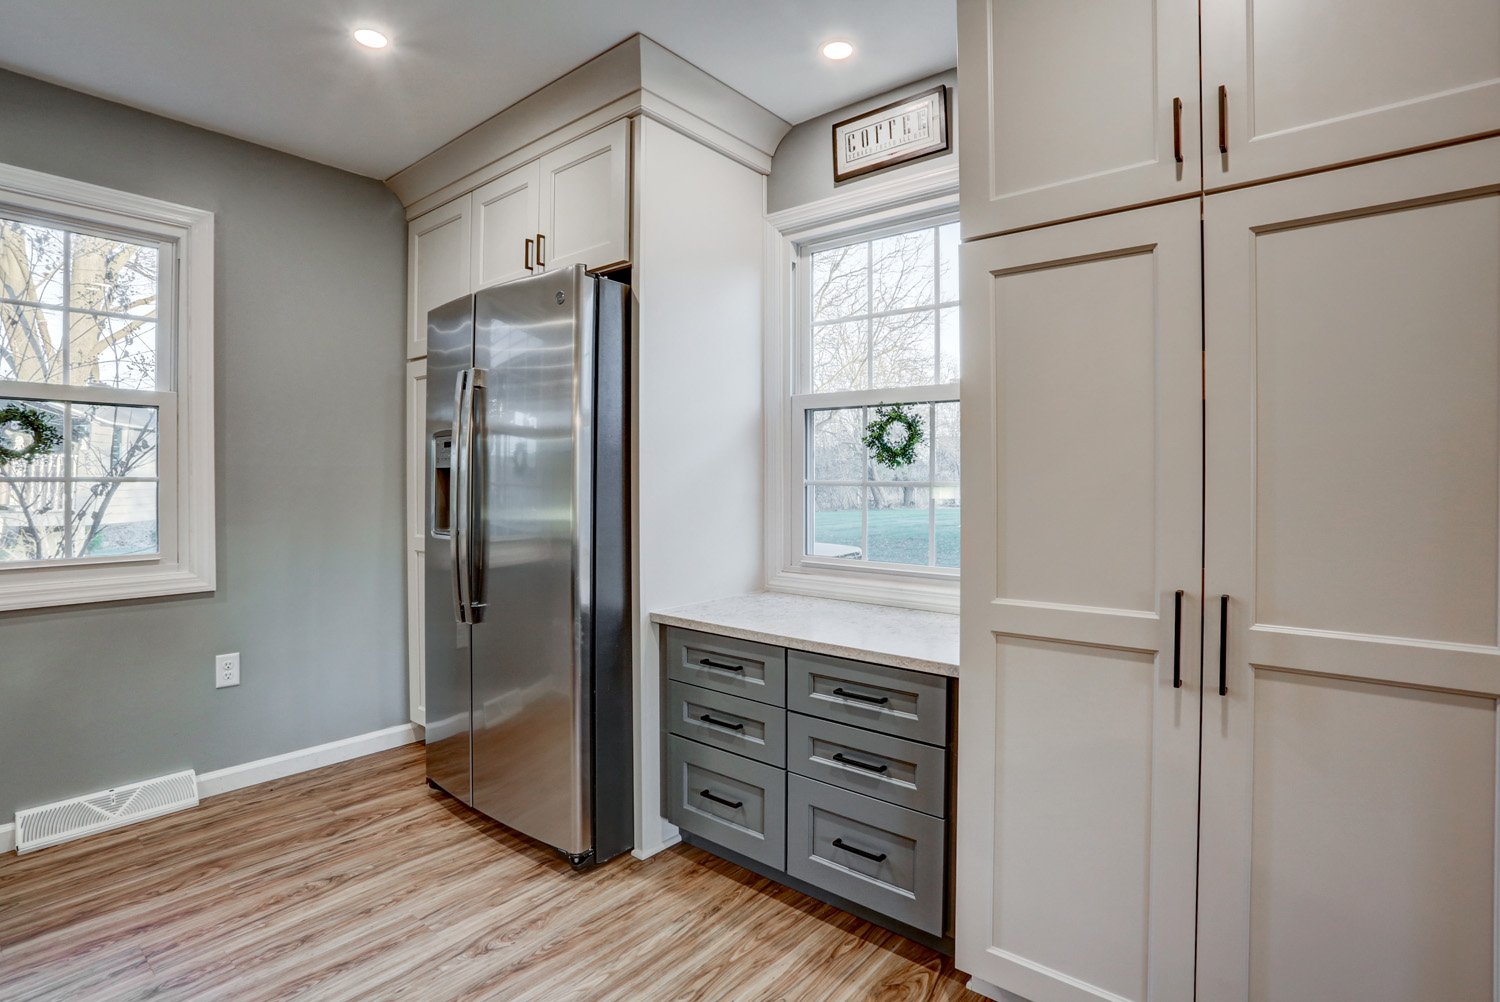 Manheim Township Kitchen Remodel with stainless steal refrigerator